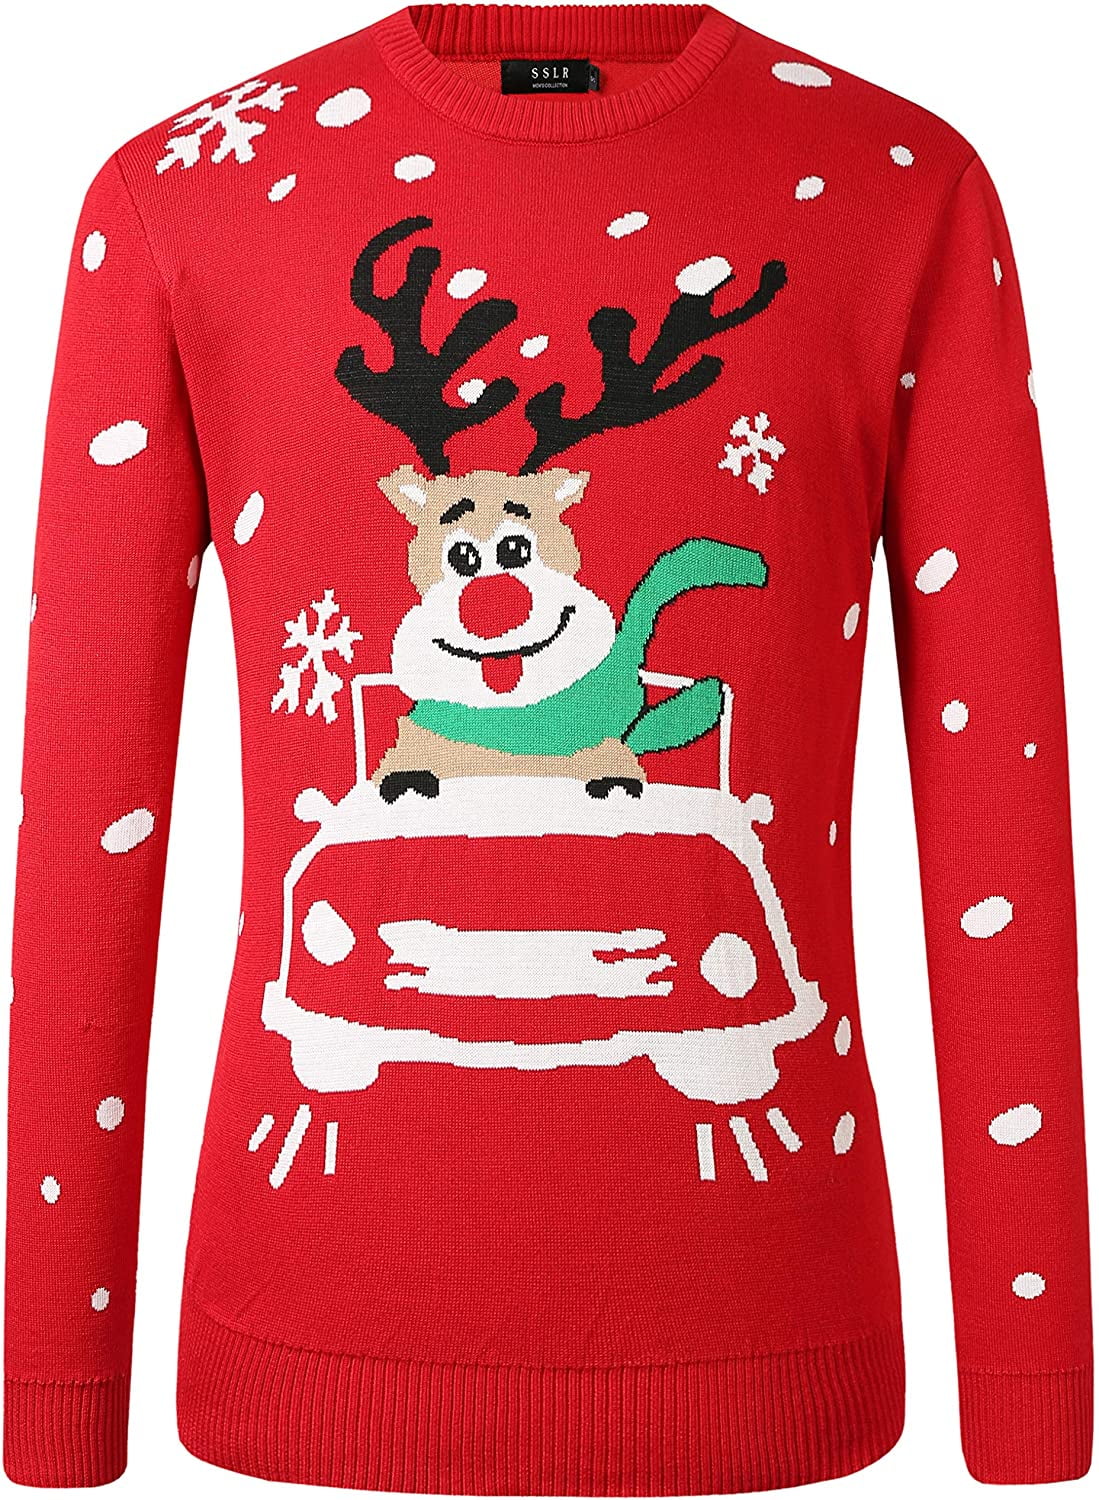 Men's Crew Neck Pullover Ugly Christmas Sweater | Walmart Canada